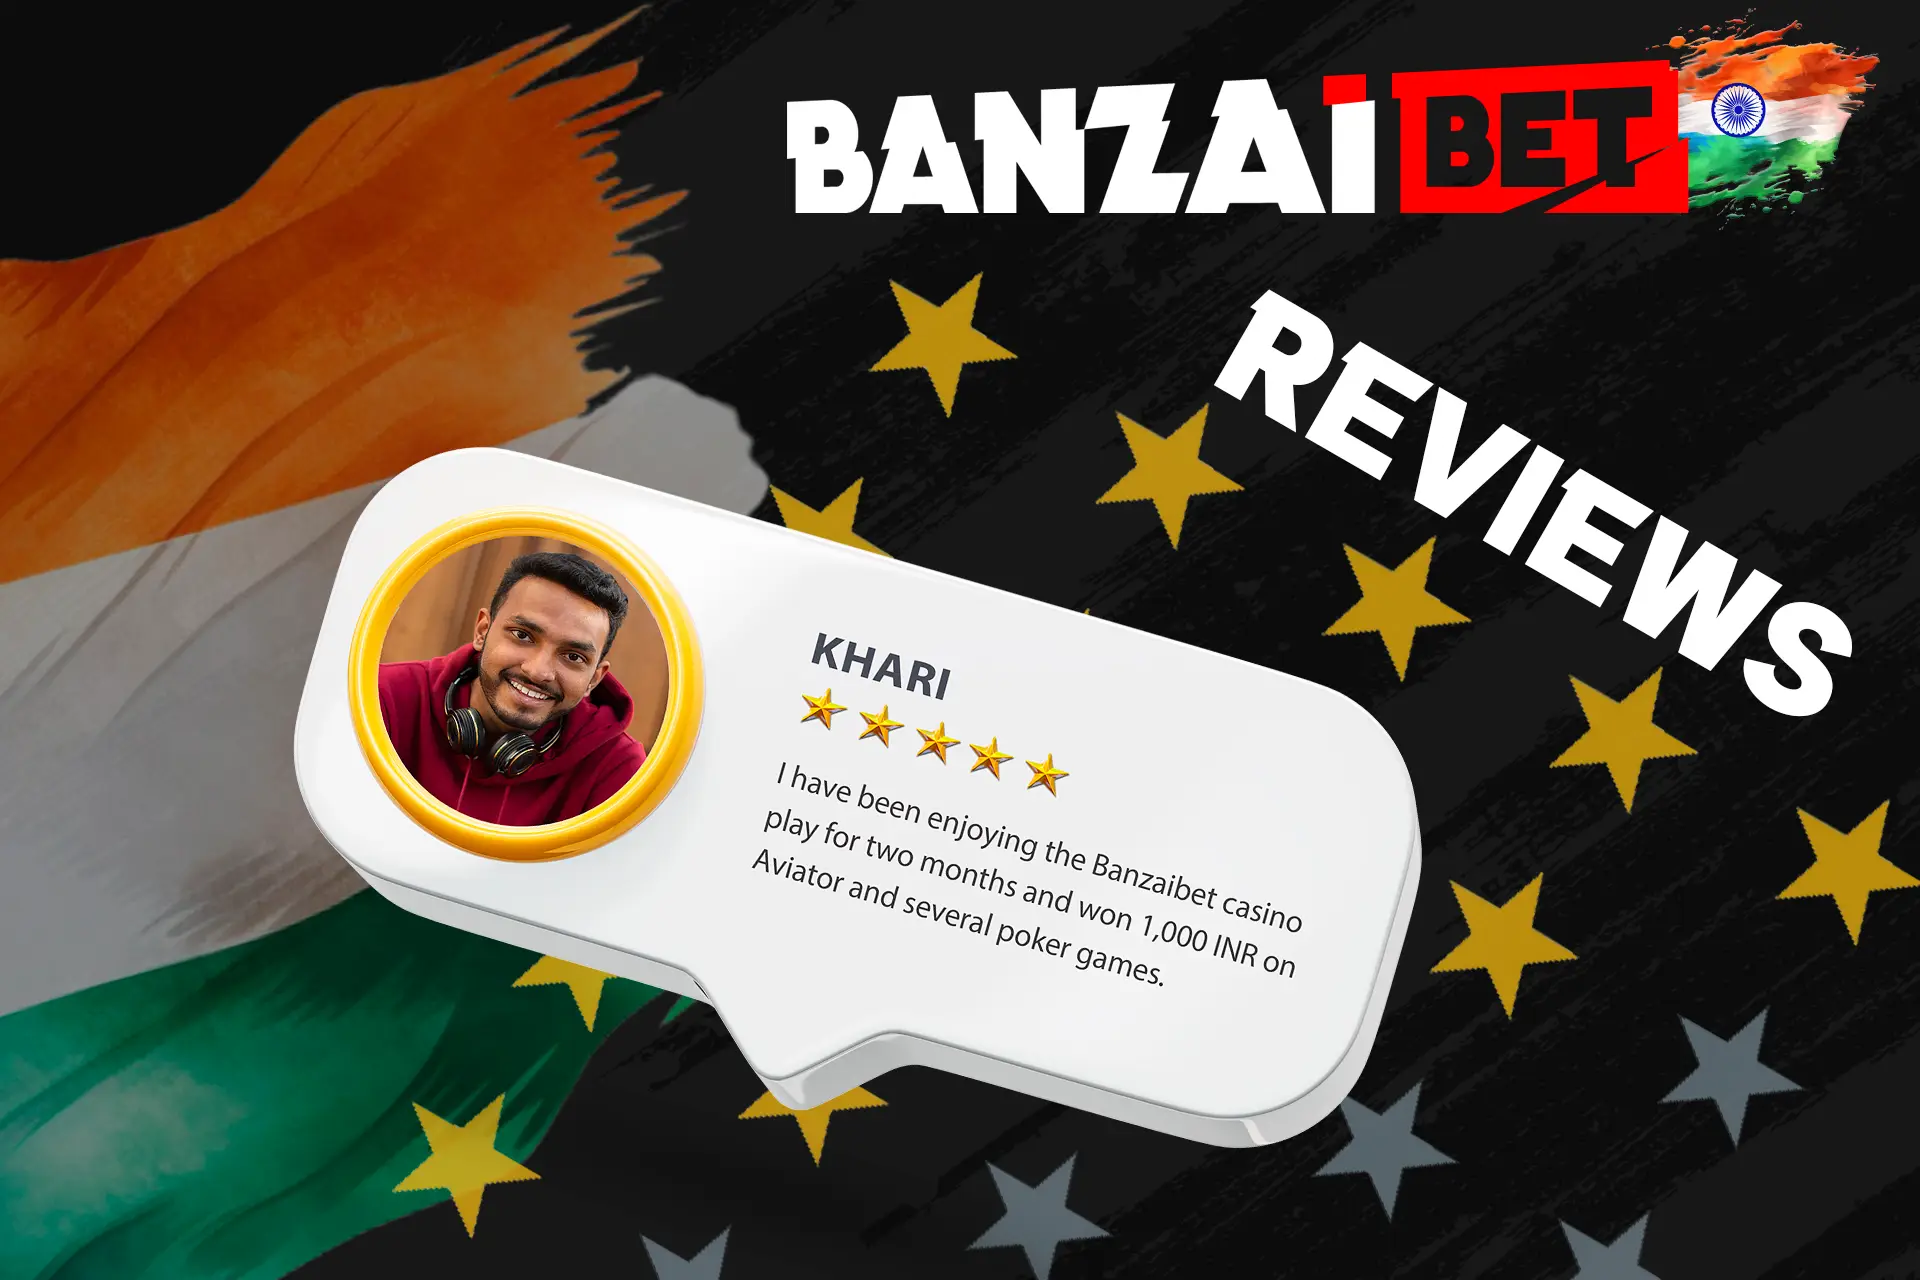 Reviews from regular users of Banzaibet India